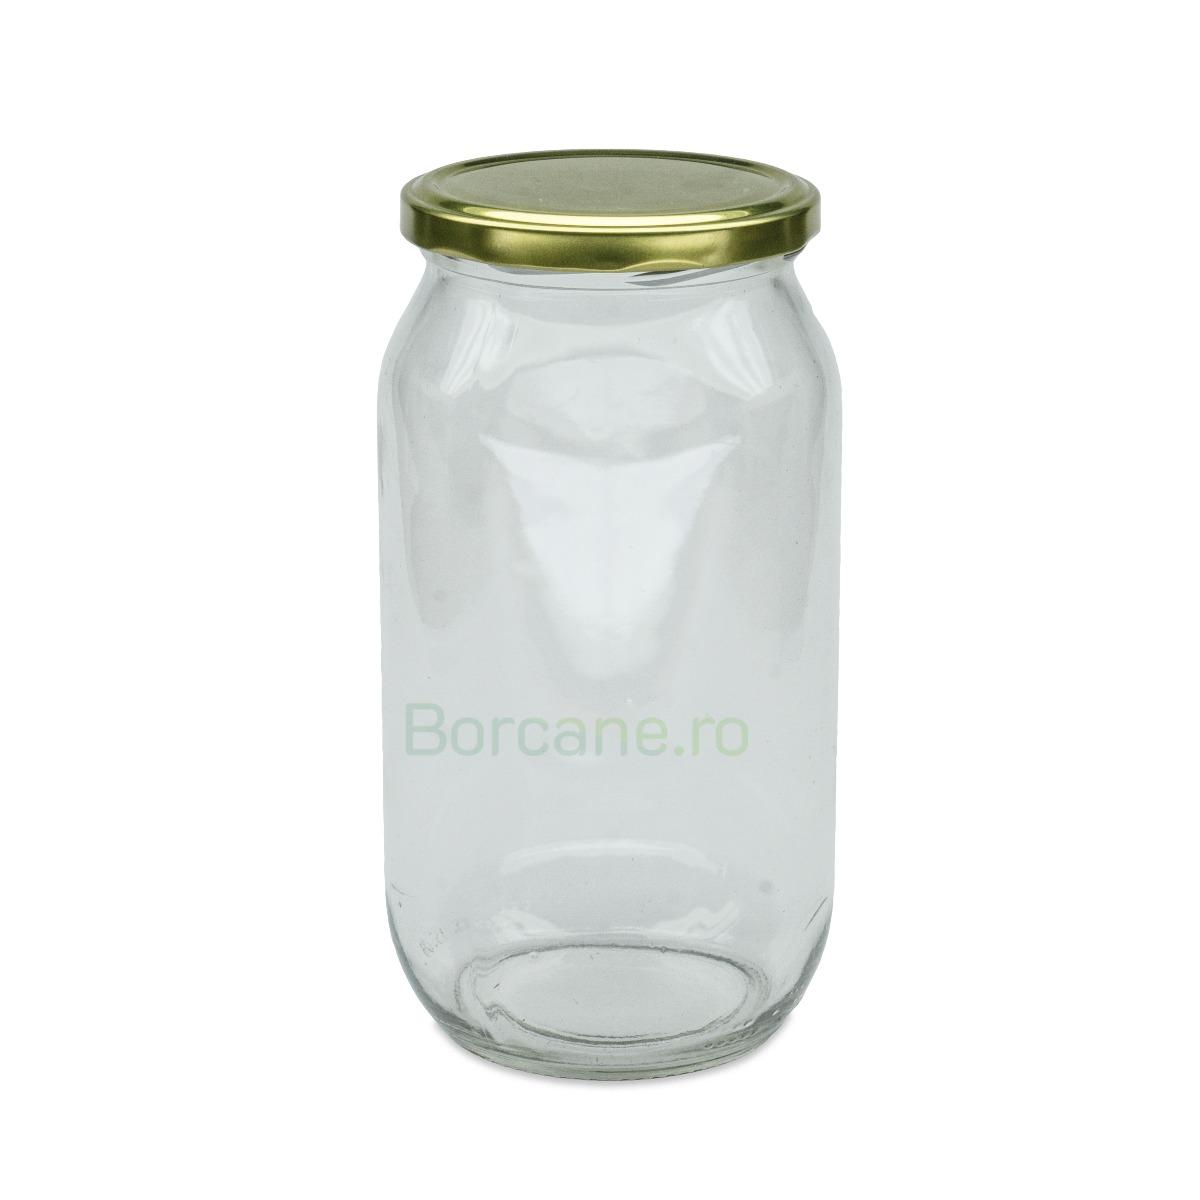 Borcan 1000 ml TO 82 mm